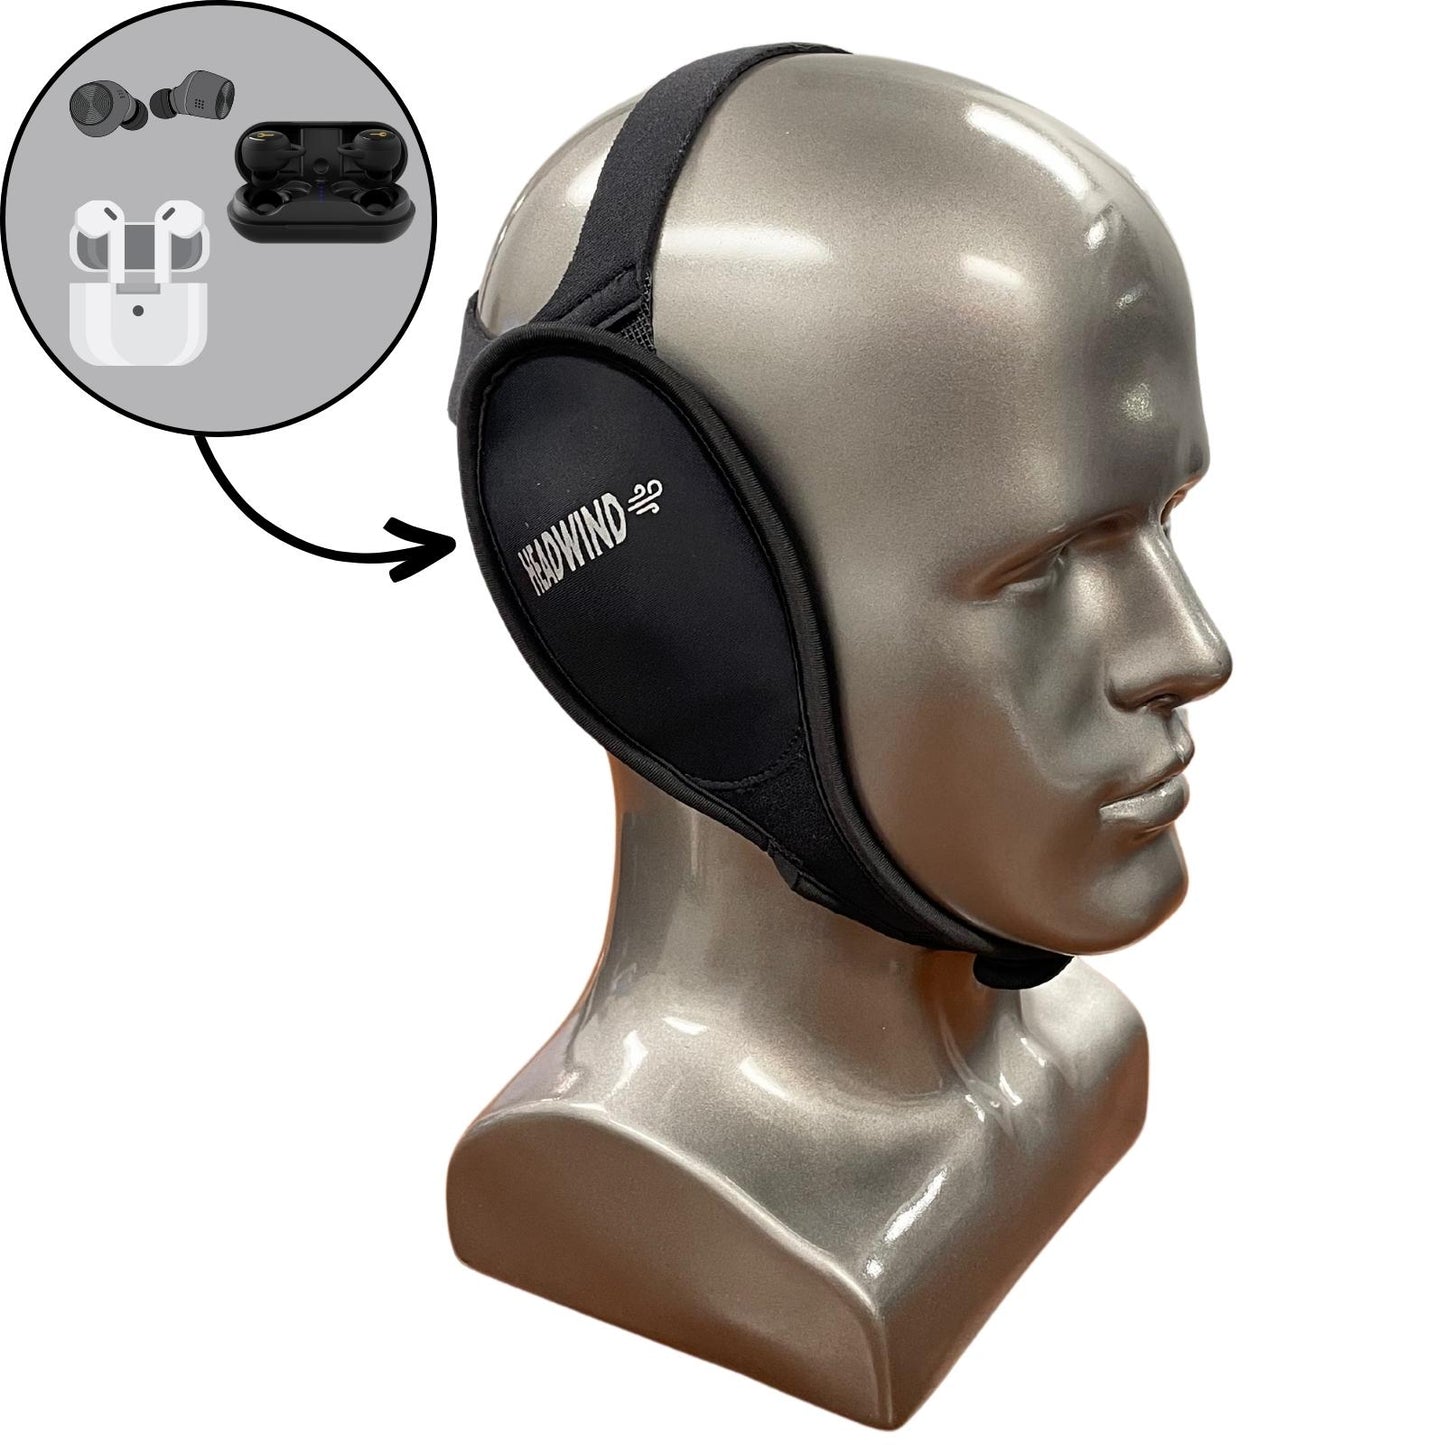 Ear Gear two strap Headwind shown on head use with most ear buds to listen to music